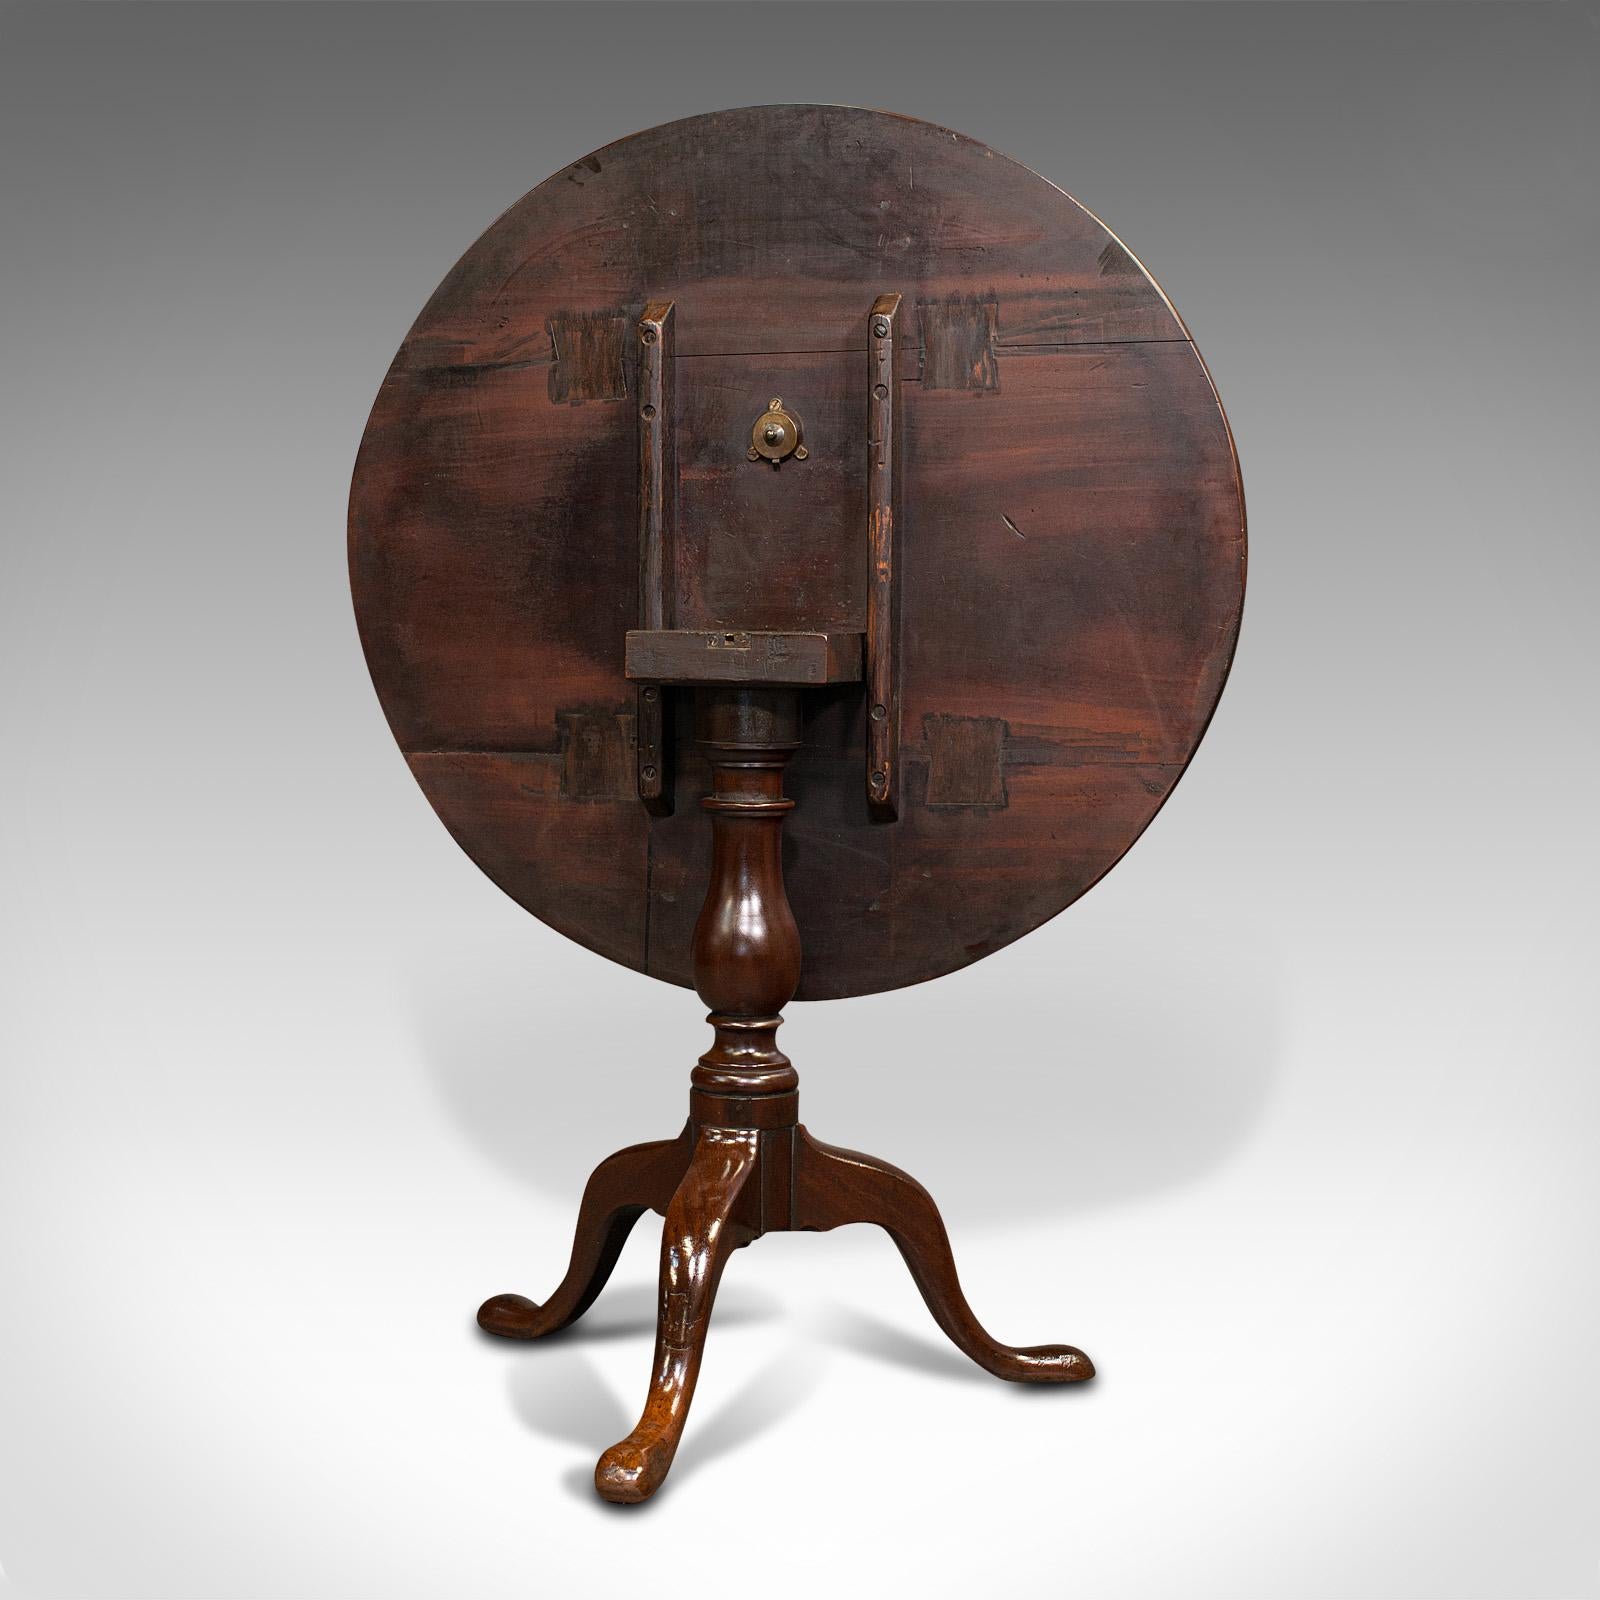 Antique Tilt Top Occasional Table, English, Mahogany, Side, Lamp, Georgian, 1800 For Sale 1